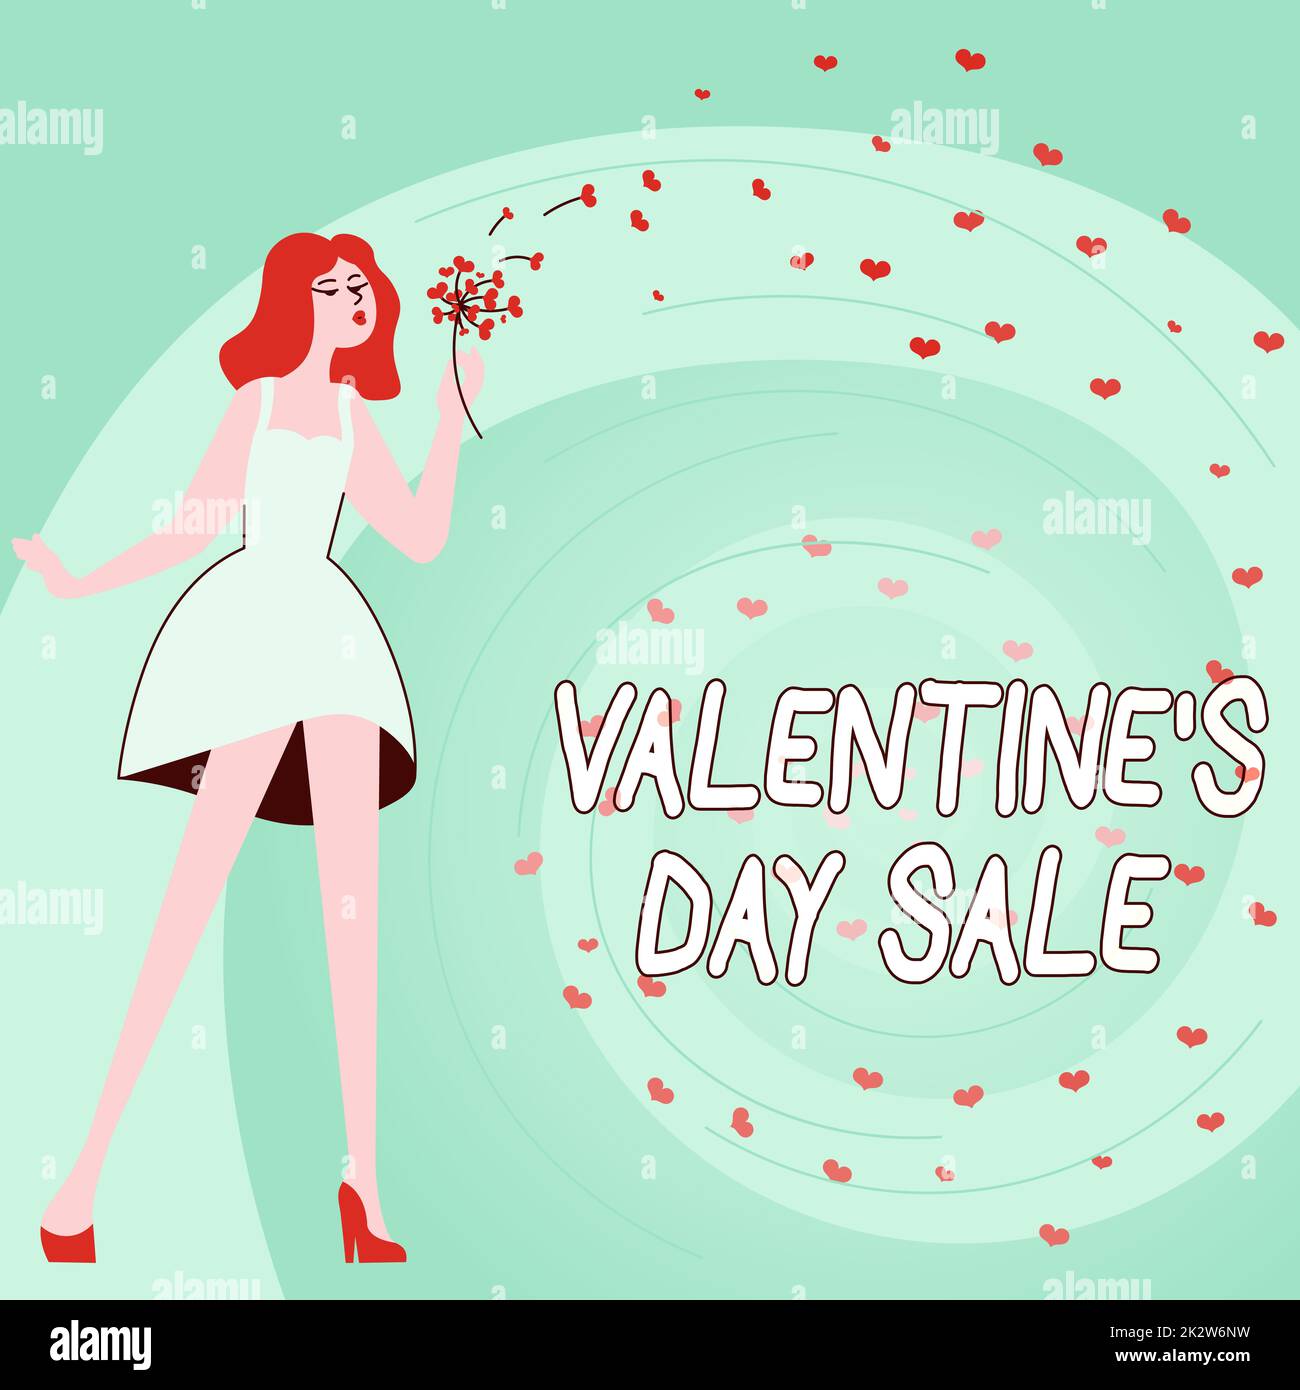 Hand writing sign VALENTINES DAY SALE. Word for Discounted items during Valentines Day Woman blowing bunch of flowers displaying peaceful romantic nature. Stock Photo